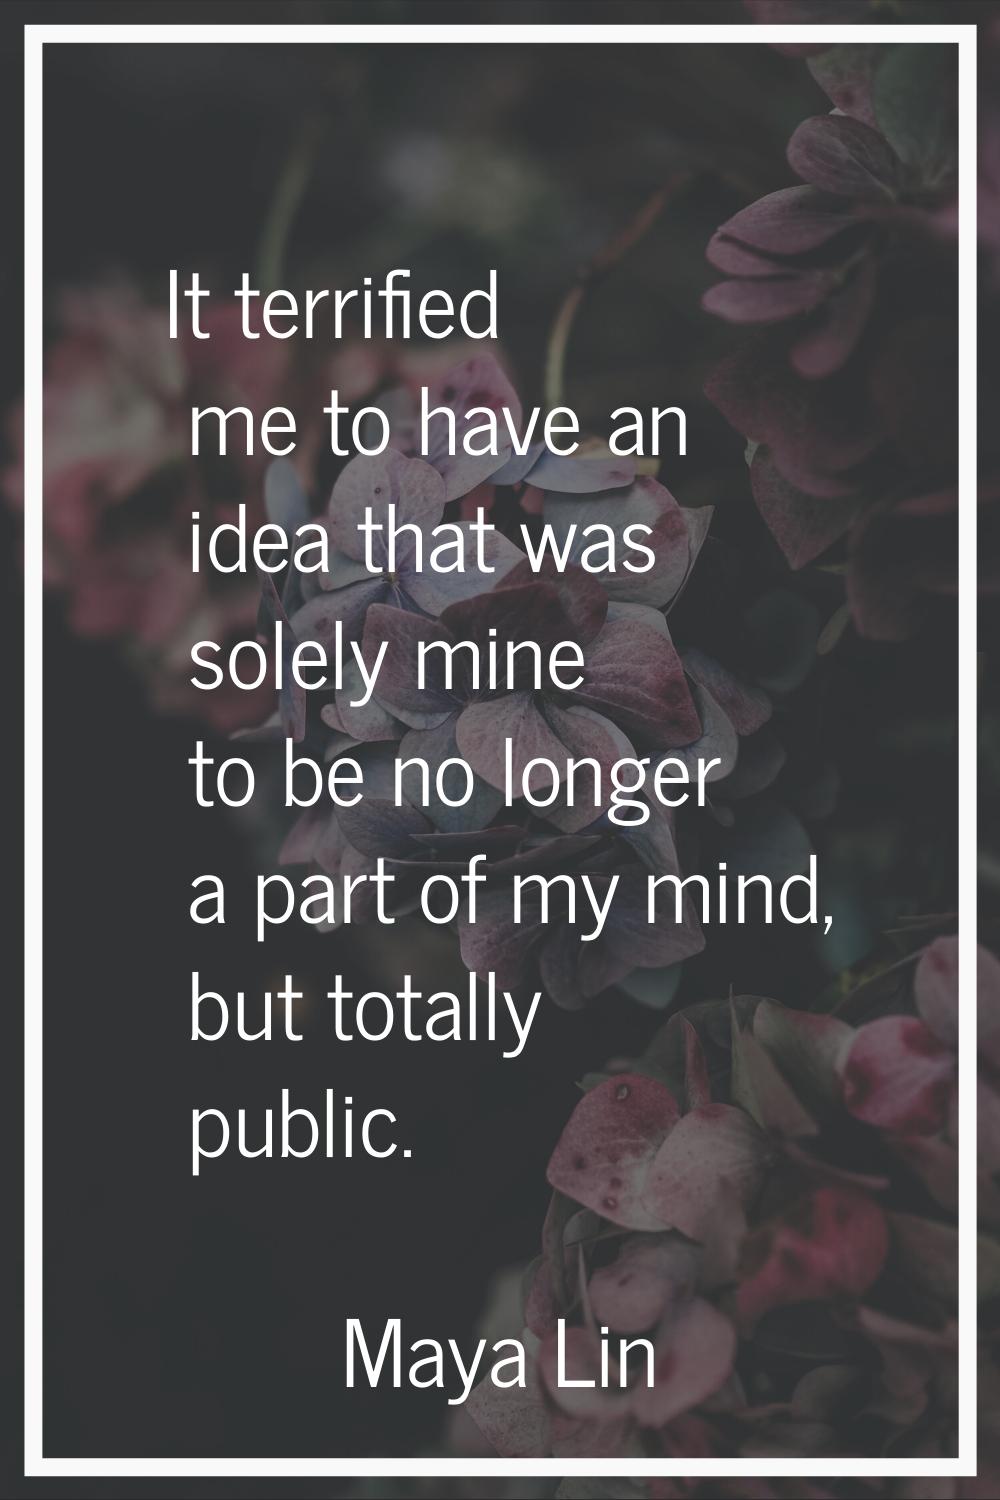 It terrified me to have an idea that was solely mine to be no longer a part of my mind, but totally